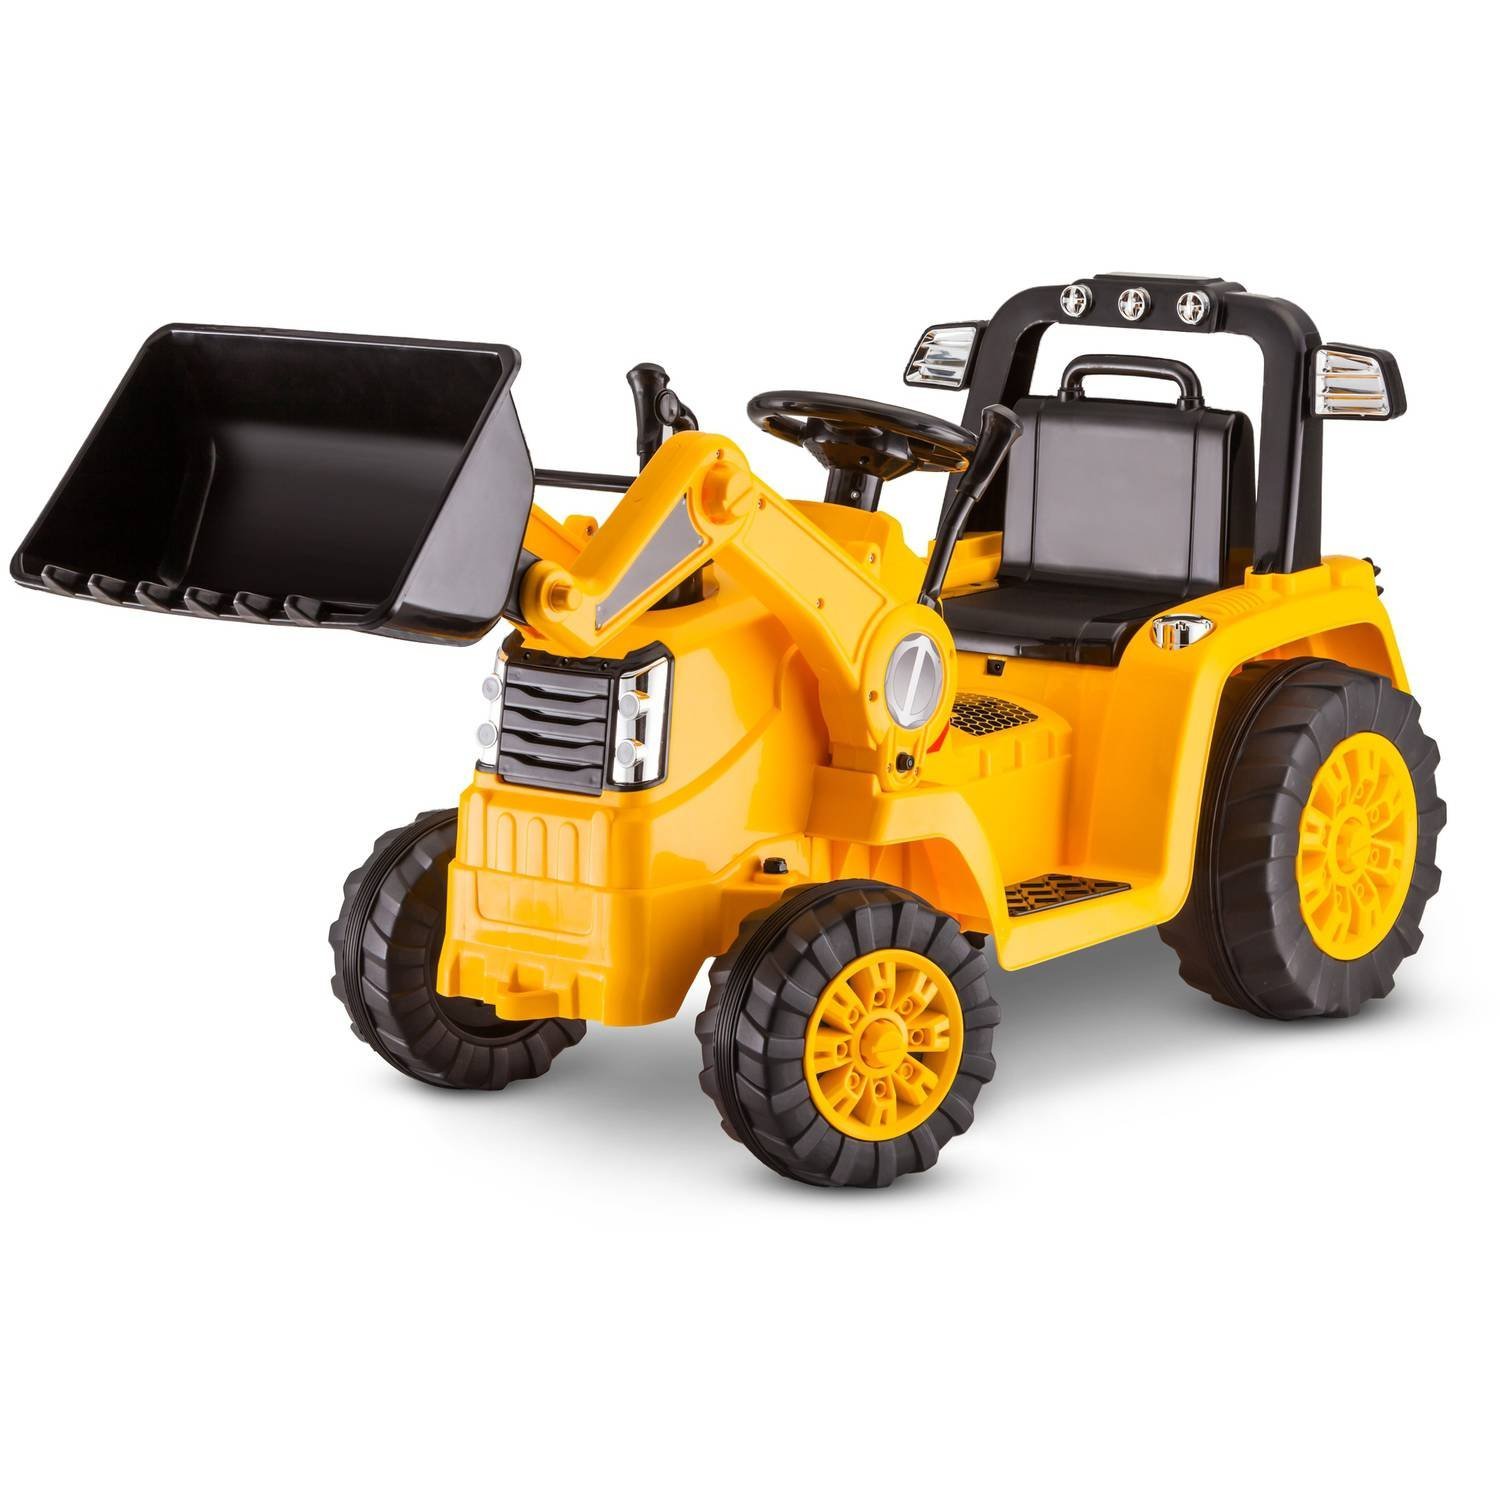 The Top 20 Best Ride On Construction Toys For Kids In 2017 ...